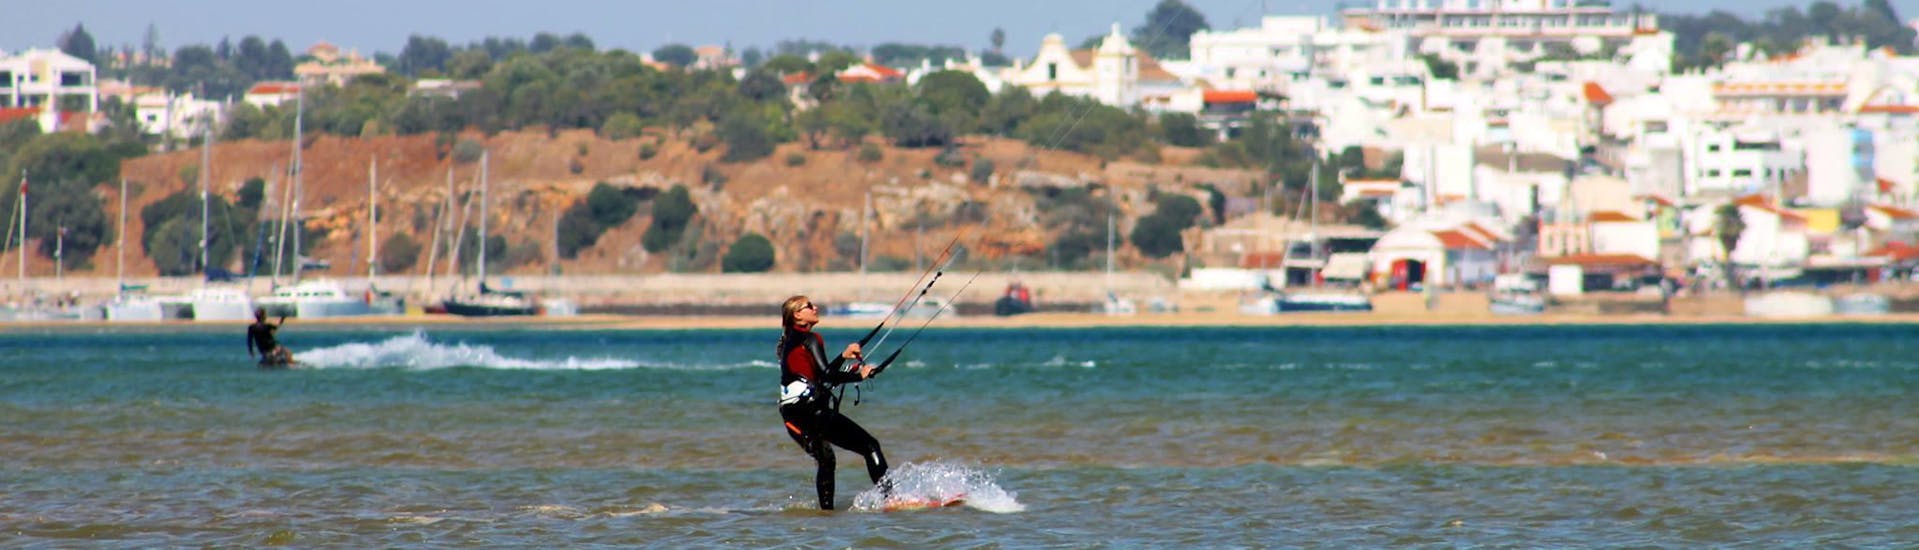 View from the cost of a guy kitesurfing during the Kitesurfing Lessons for Kids & Adults - All Levels.